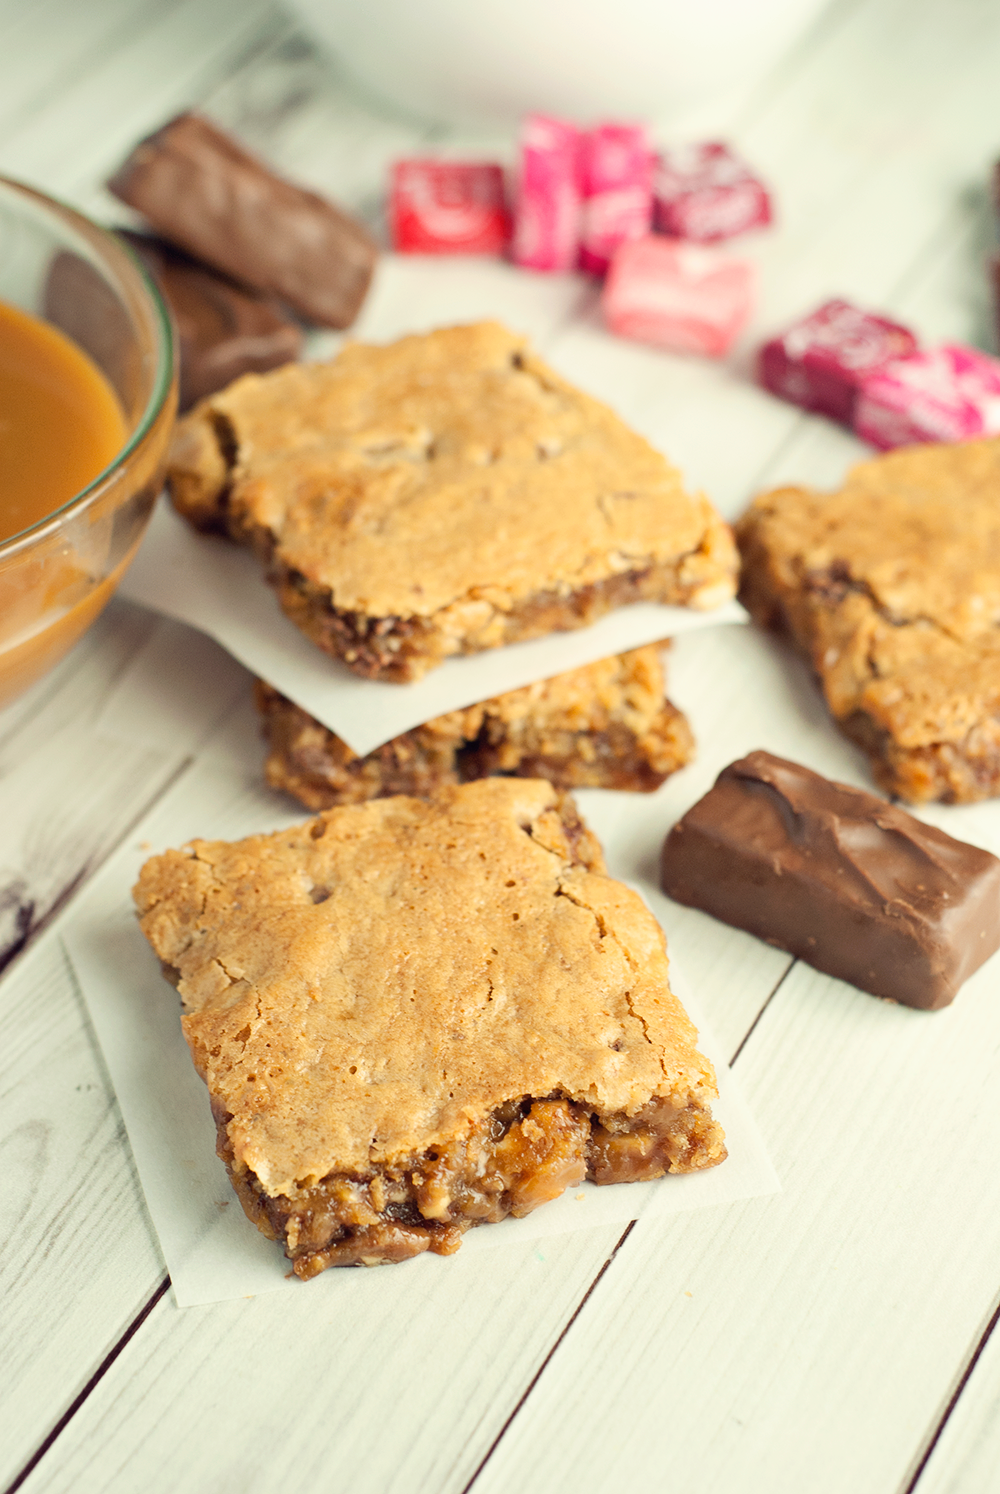 In need of a new, decadent, EASY dessert? Then try these amazing salted caramel Snickers cookie bars!